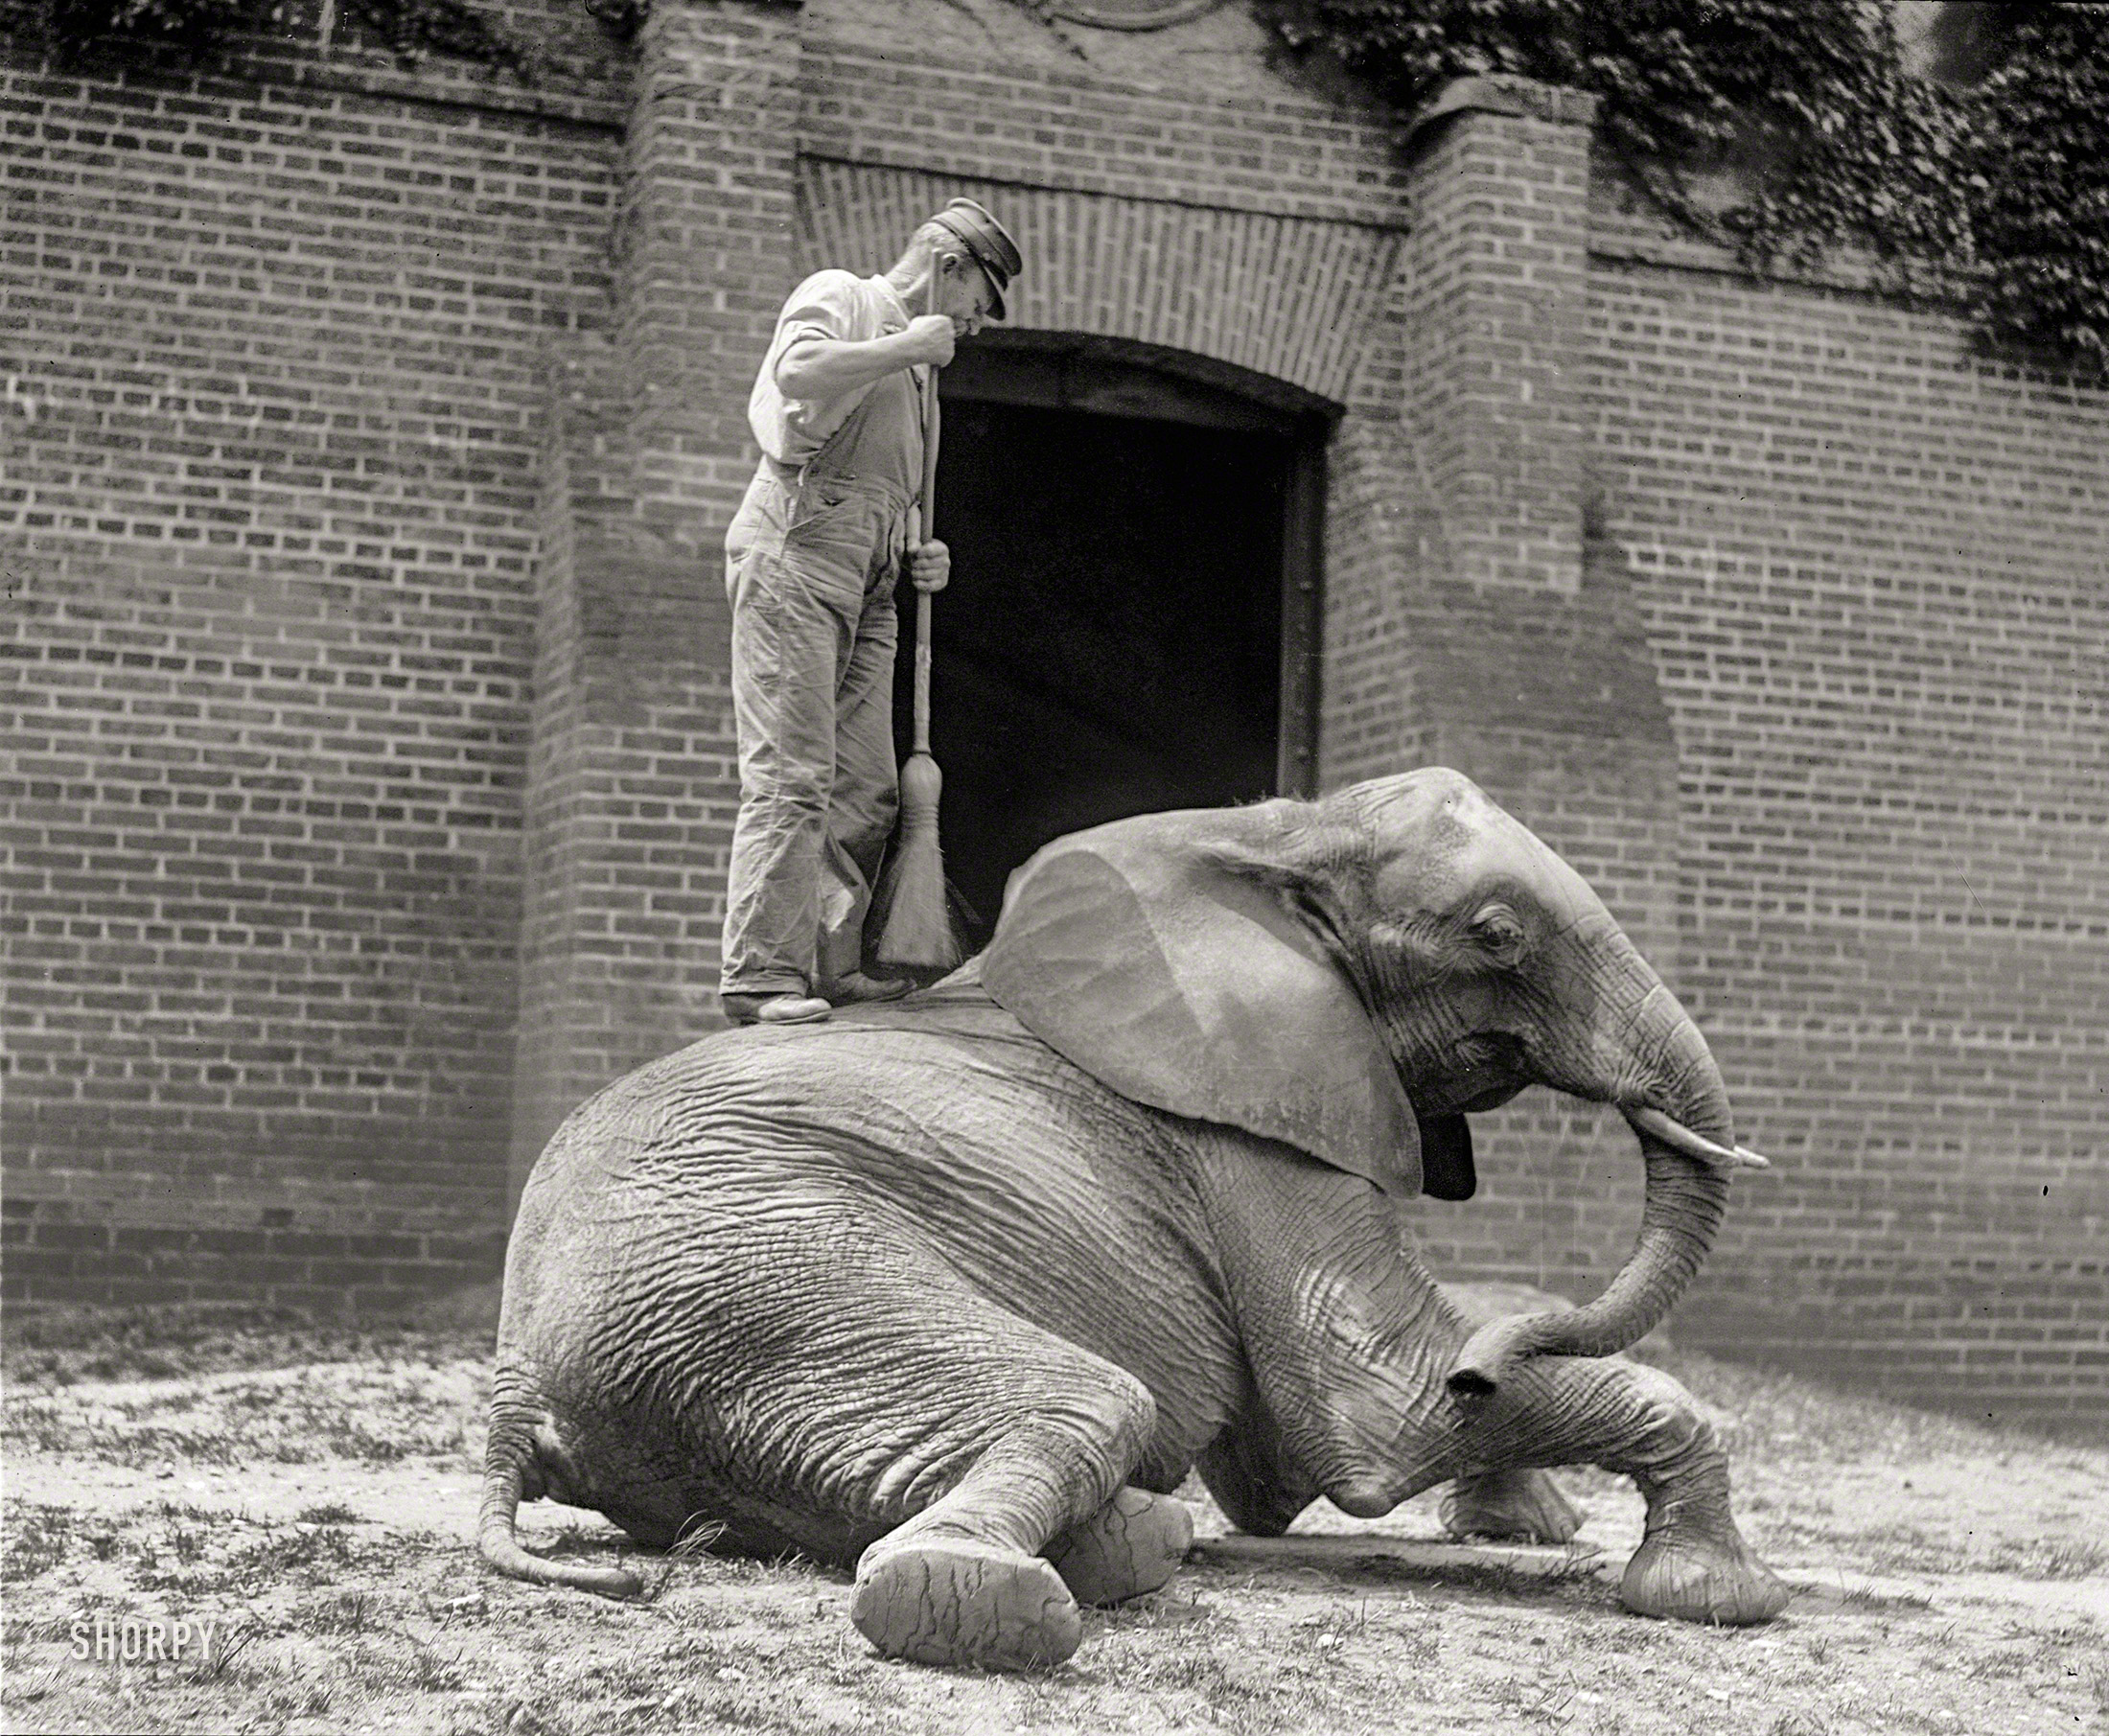 August 10, 1922. " 'Jumbino,' the favorite elephant at the National Zoo, has his daily bath and scrubbing. Keeper Charlie Louis getting in the preliminaries with his wire broom before using the hose." 4x5 inch glass negative. View full size.